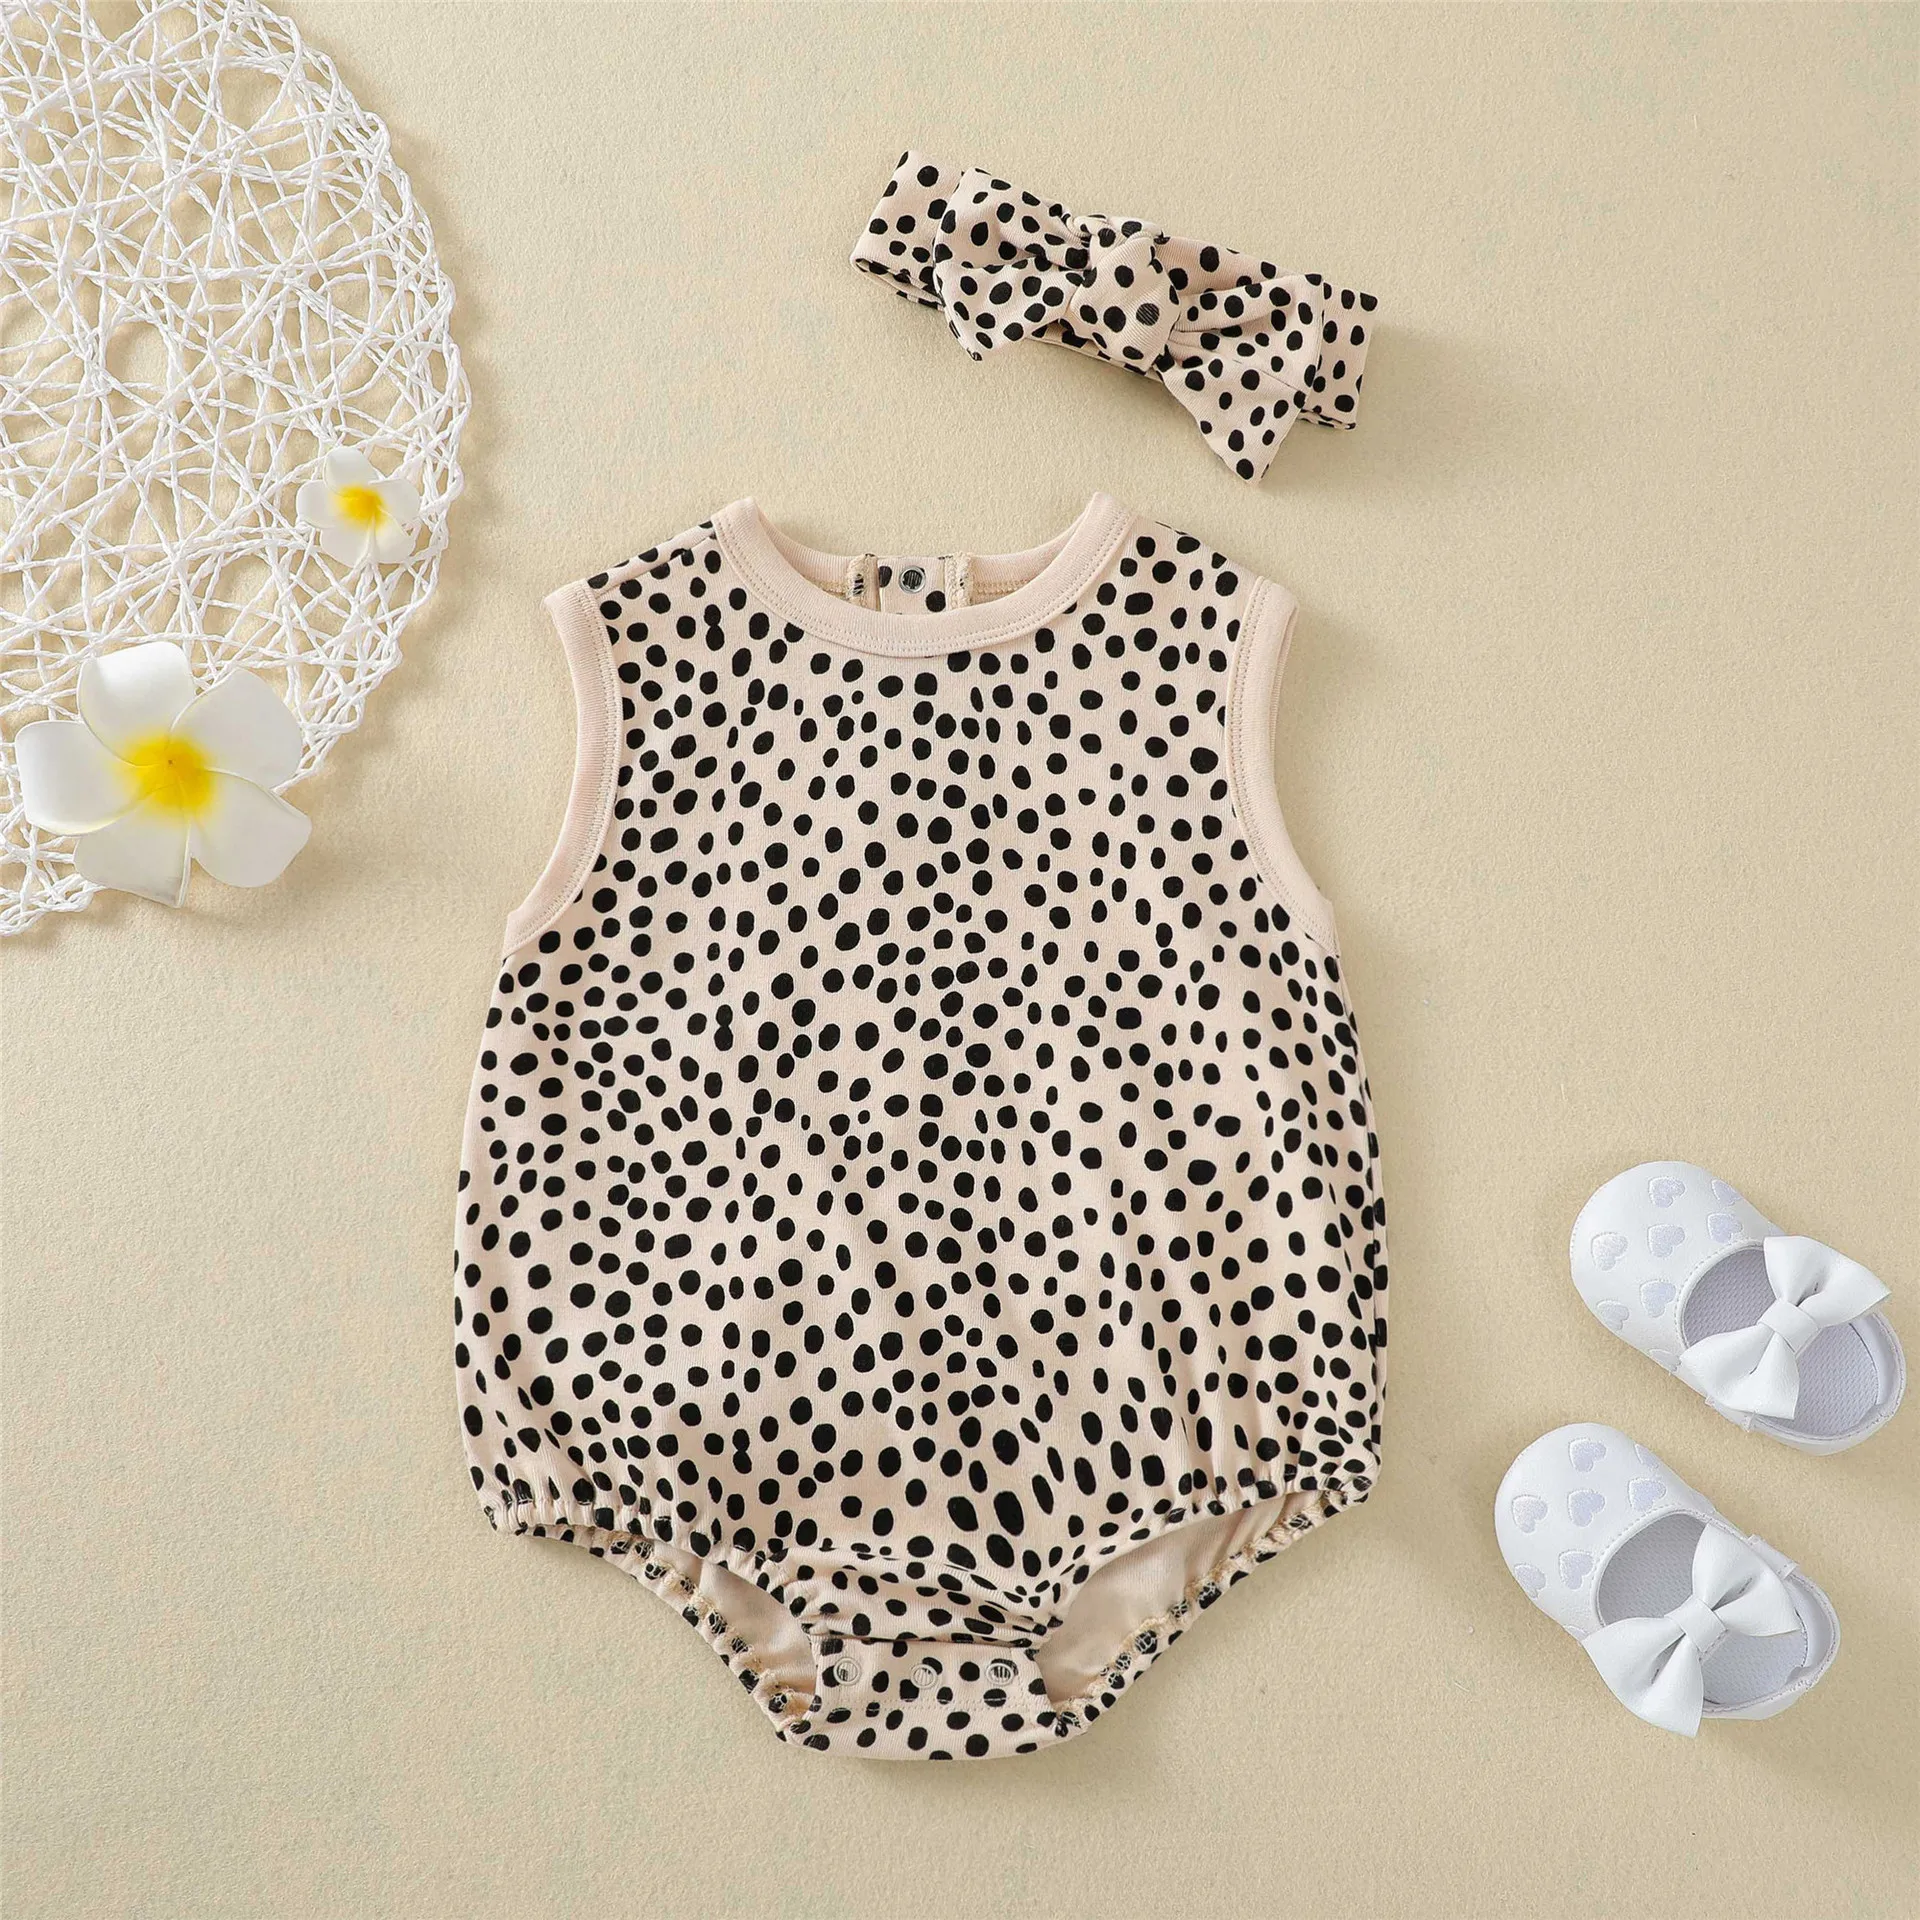 baby clothes cheap Newborn Romper with Headband New Summer Baby Clothes Girls Boys Infant Cotton Polka Dot Printing Sleeveless Bag Fart Jumpsuit cheap baby bodysuits	